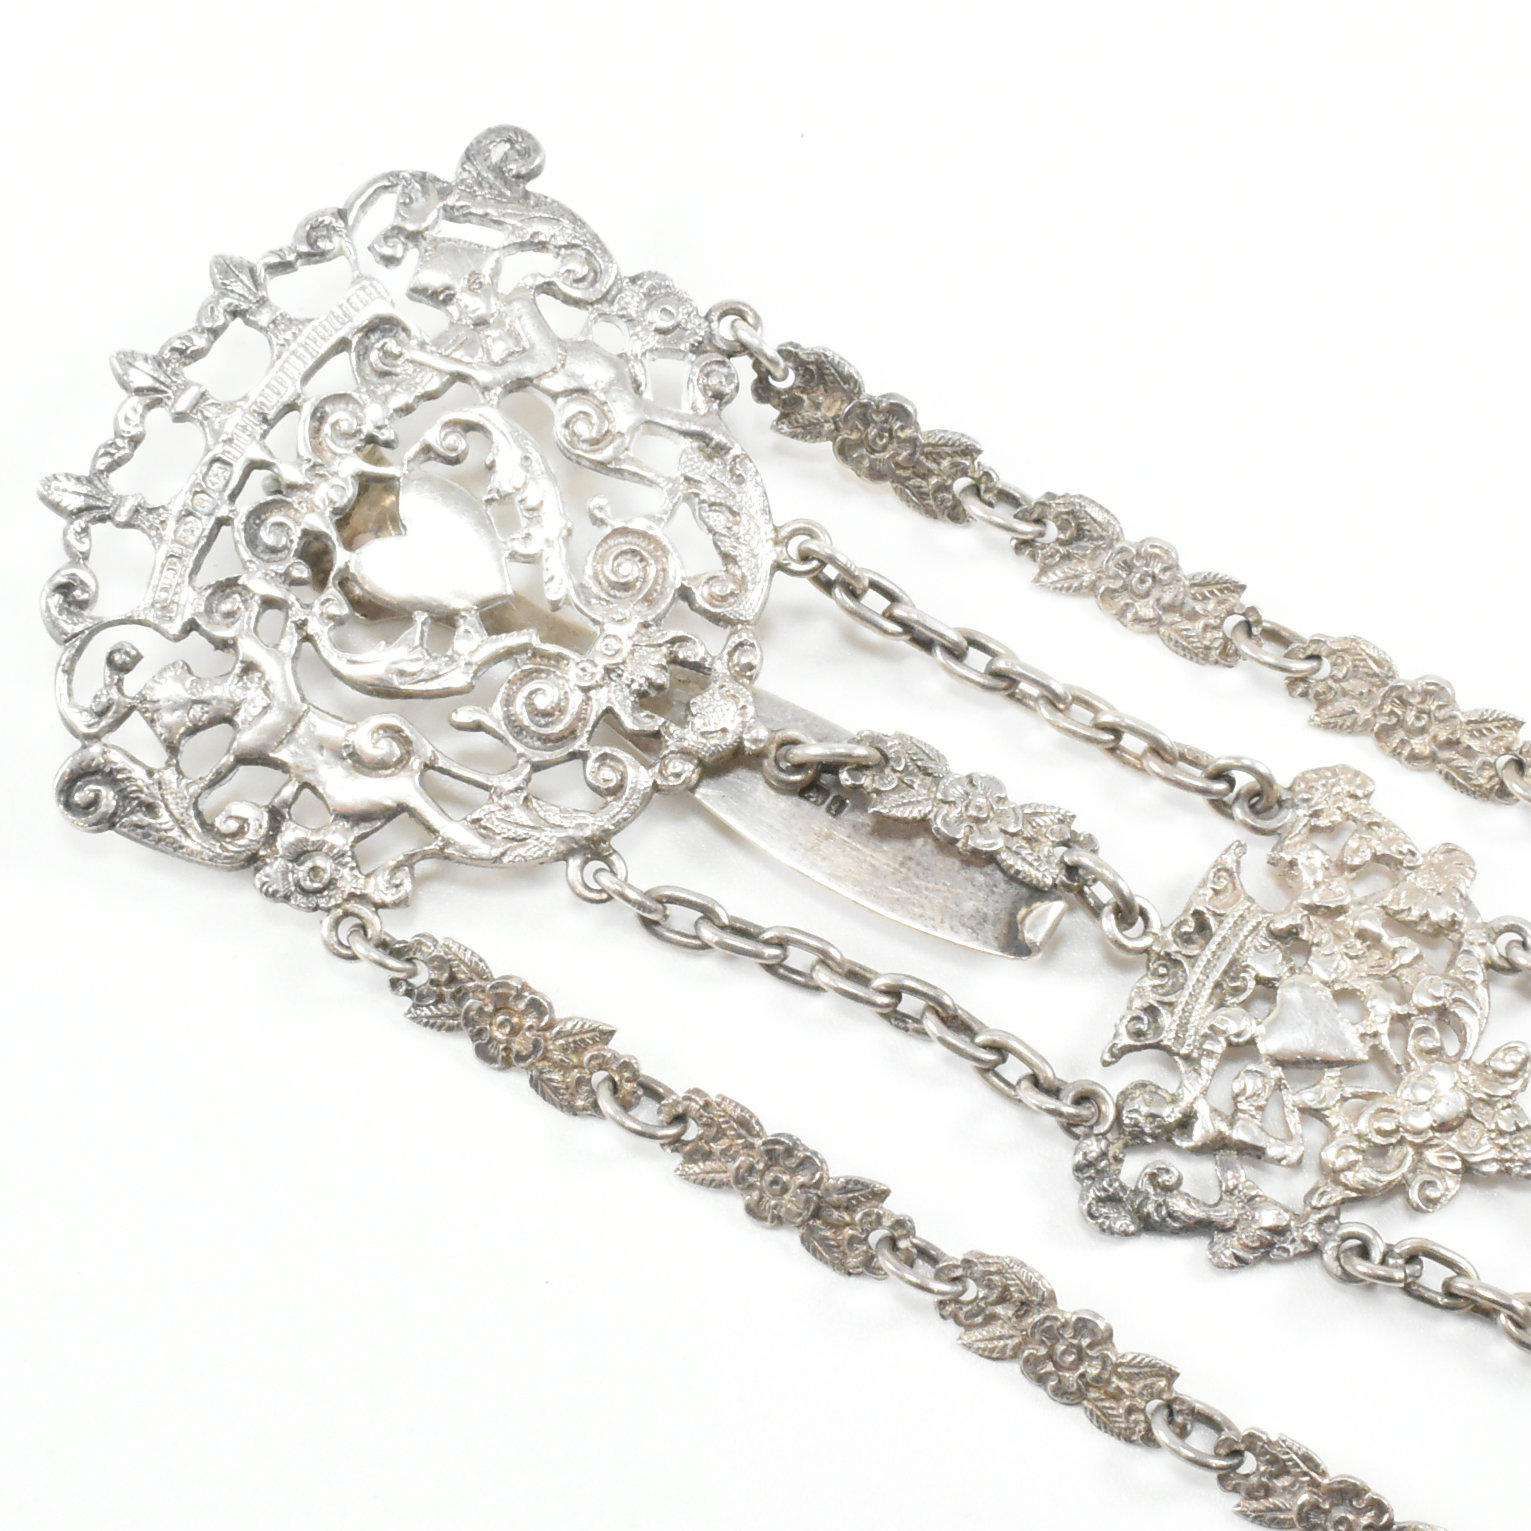 19TH CENTURY VICTORIAN HALLMARKED SILVER CHATELAINE - Image 3 of 18